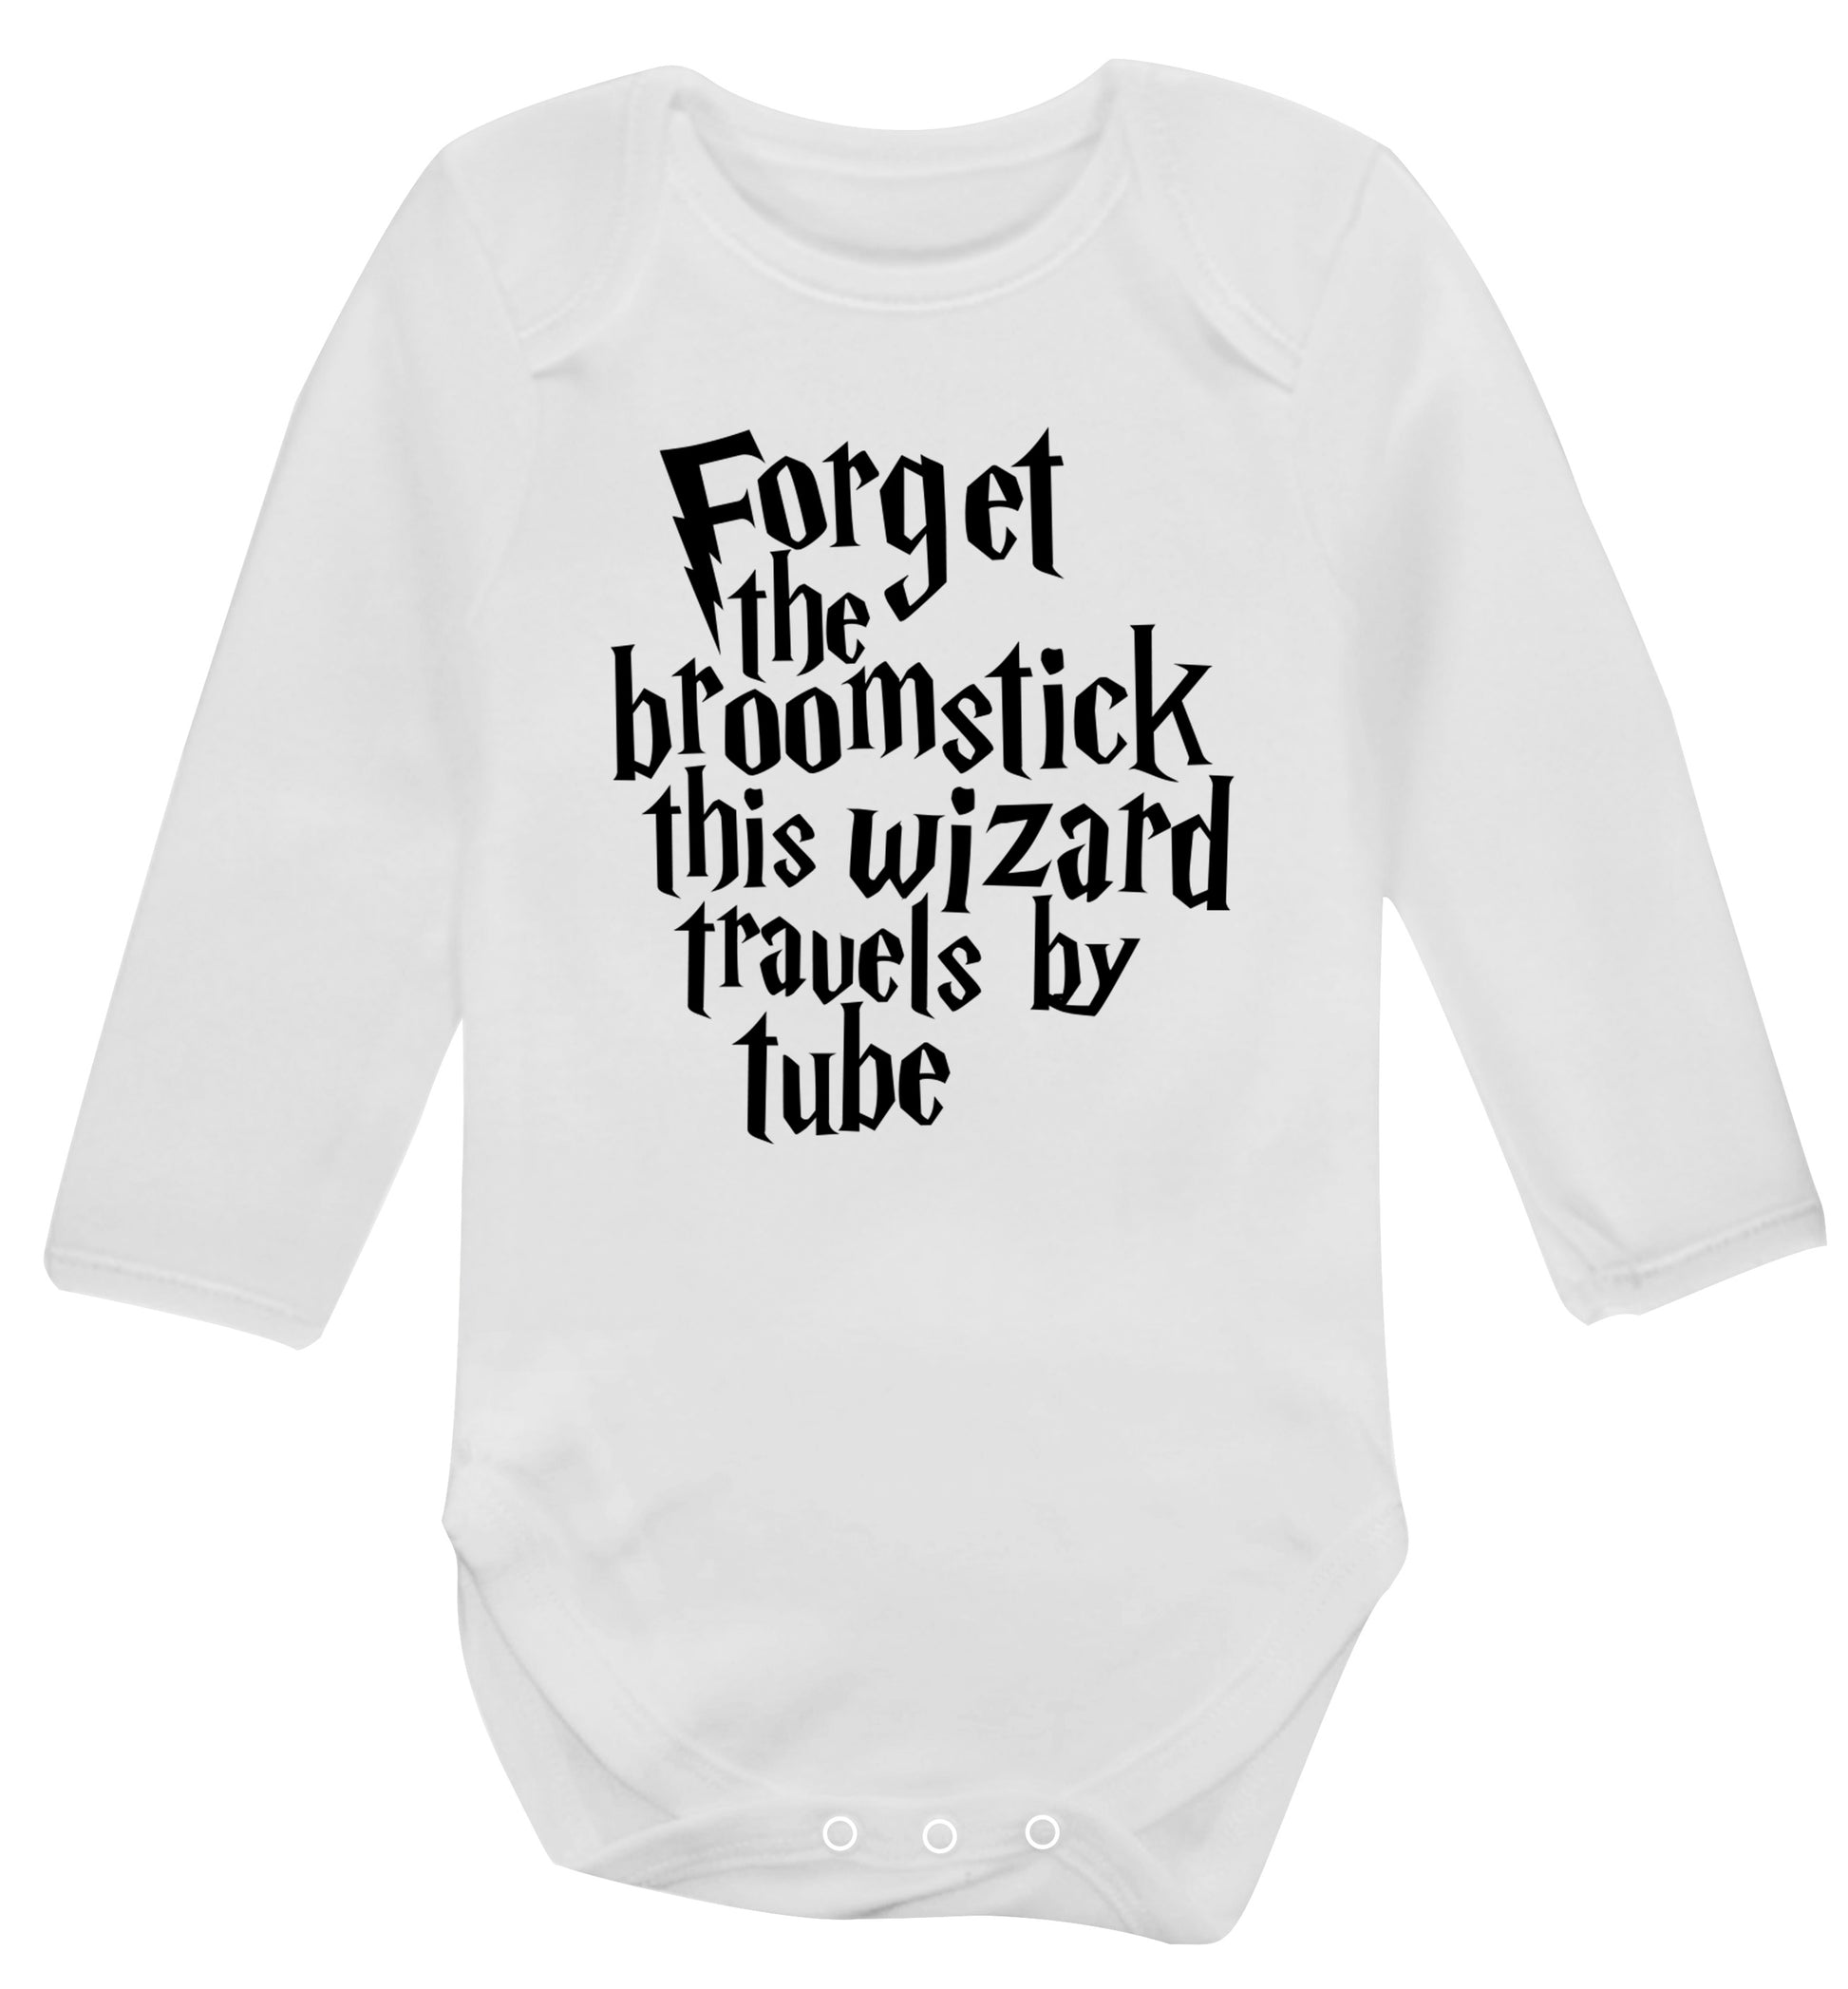 Forget the broomstick this wizard travels by tube Baby Vest long sleeved white 6-12 months